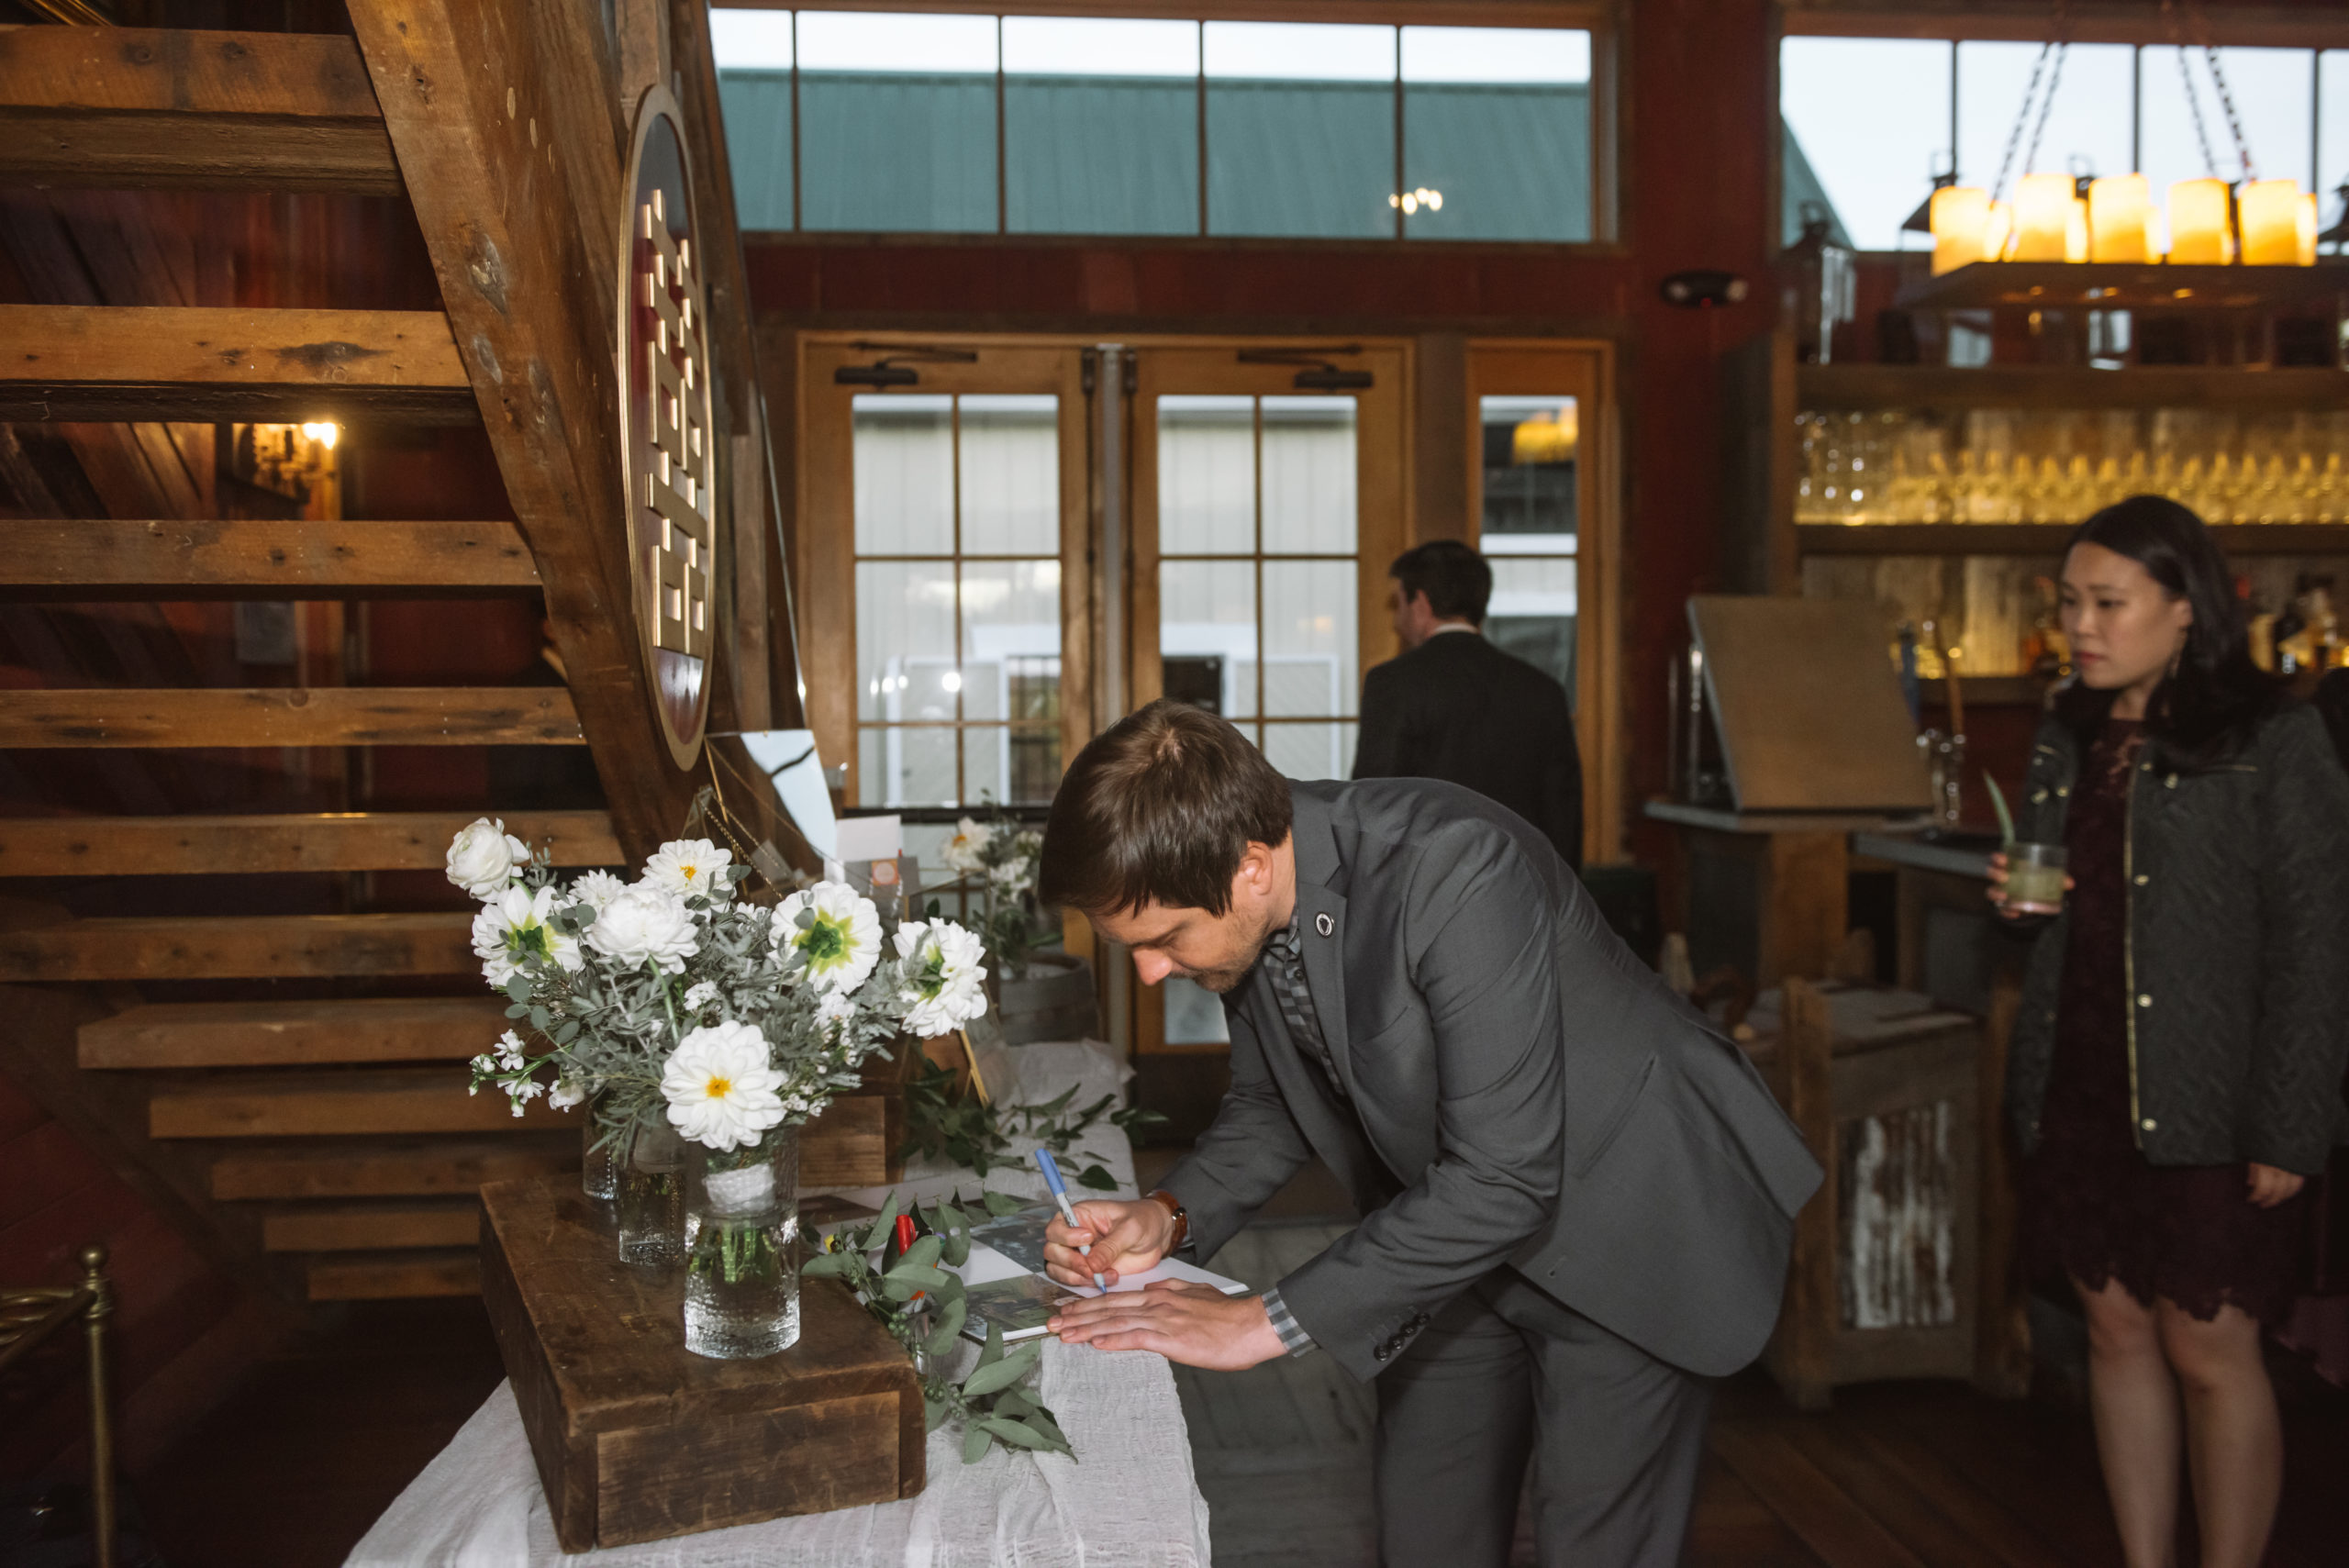 Wedding guest mid-signing of the guest book. There is a bouquet of white flowers in a vase on top of a wooden platform on the table.